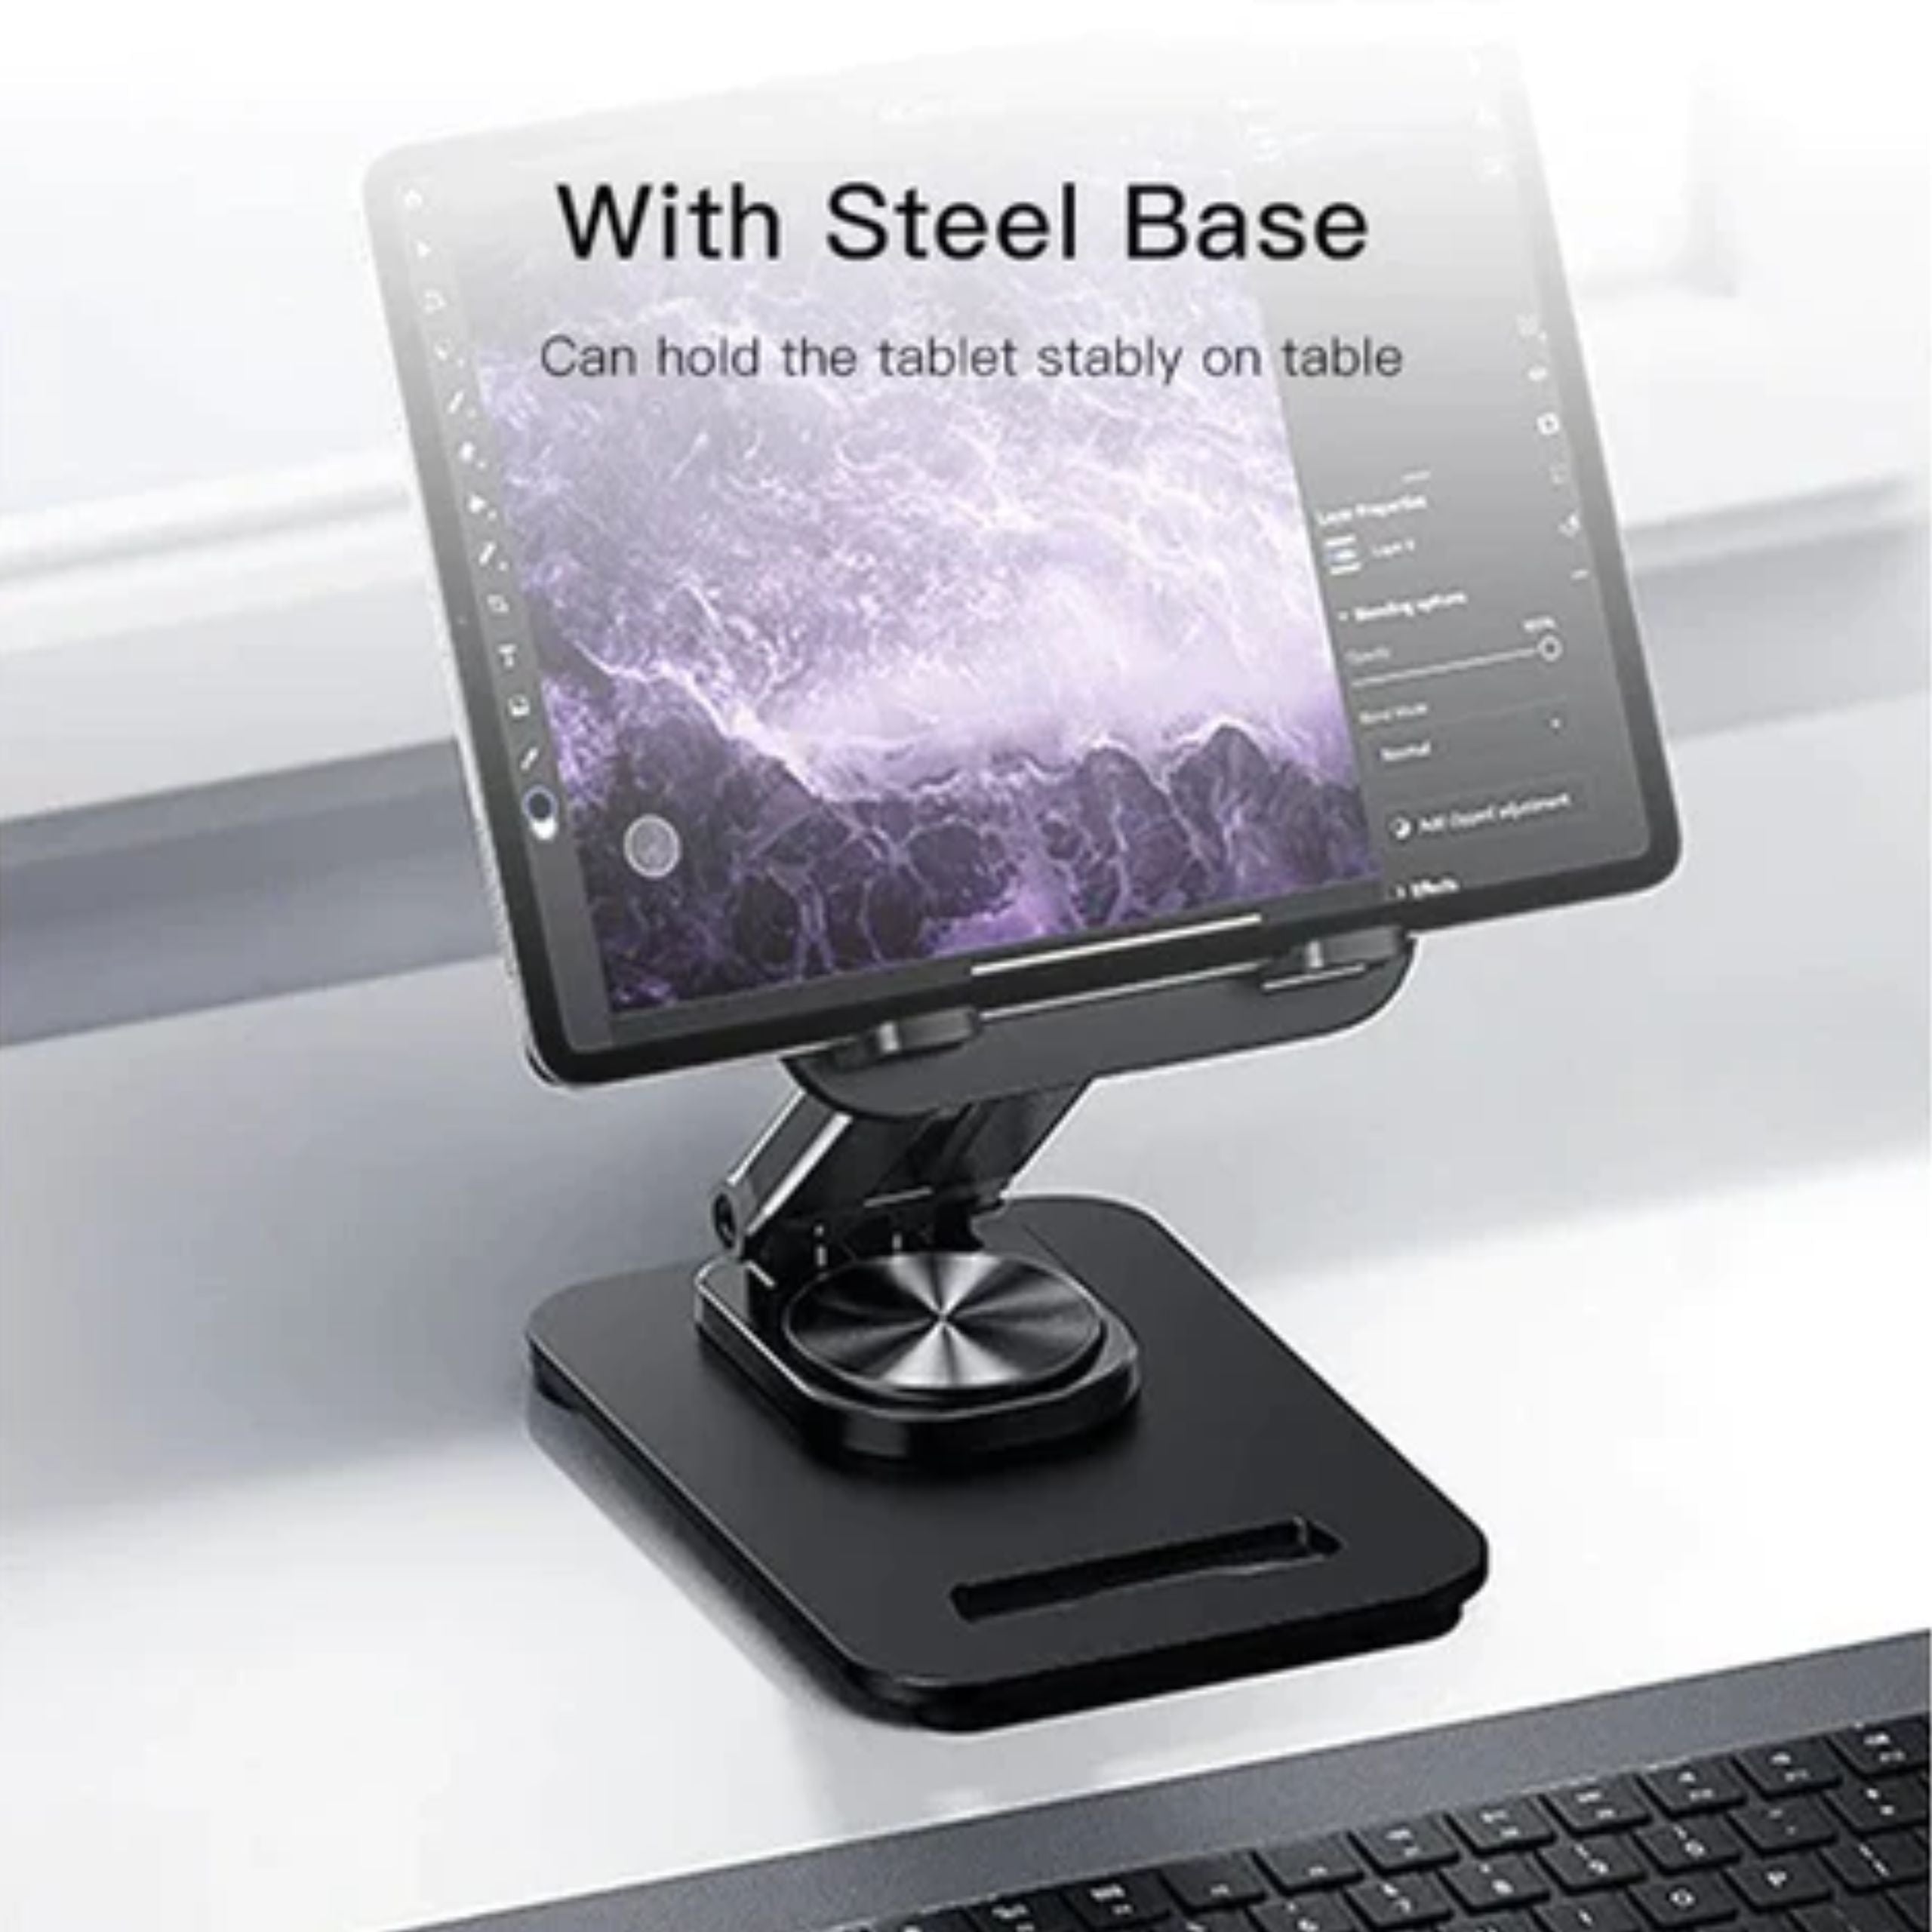 Yesido Tablets Stand C183 - Black